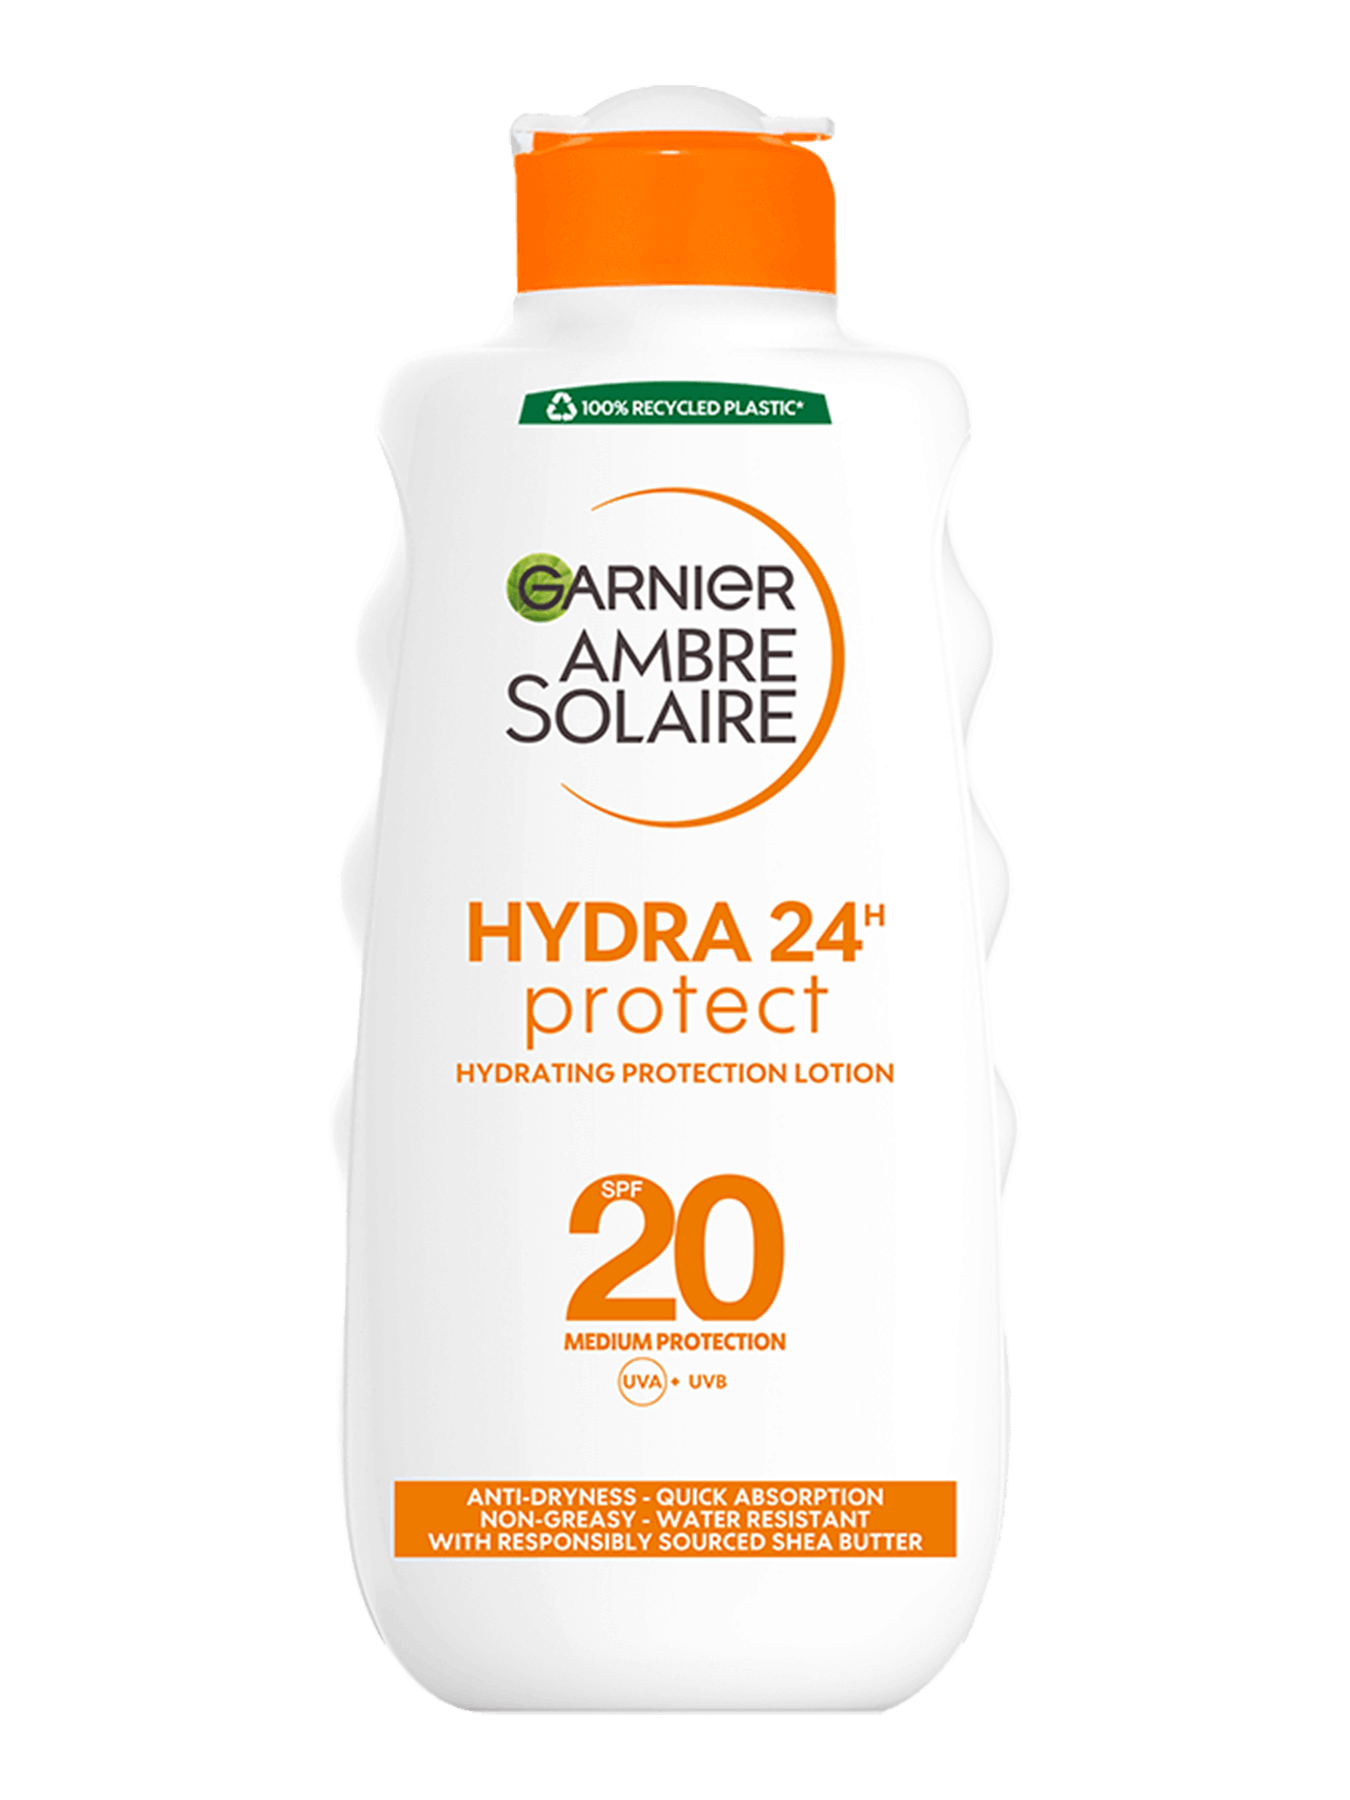 GAR Ambre Solaire Hydra Protect 24 Lotion spf20 200ml 2021 front (1)